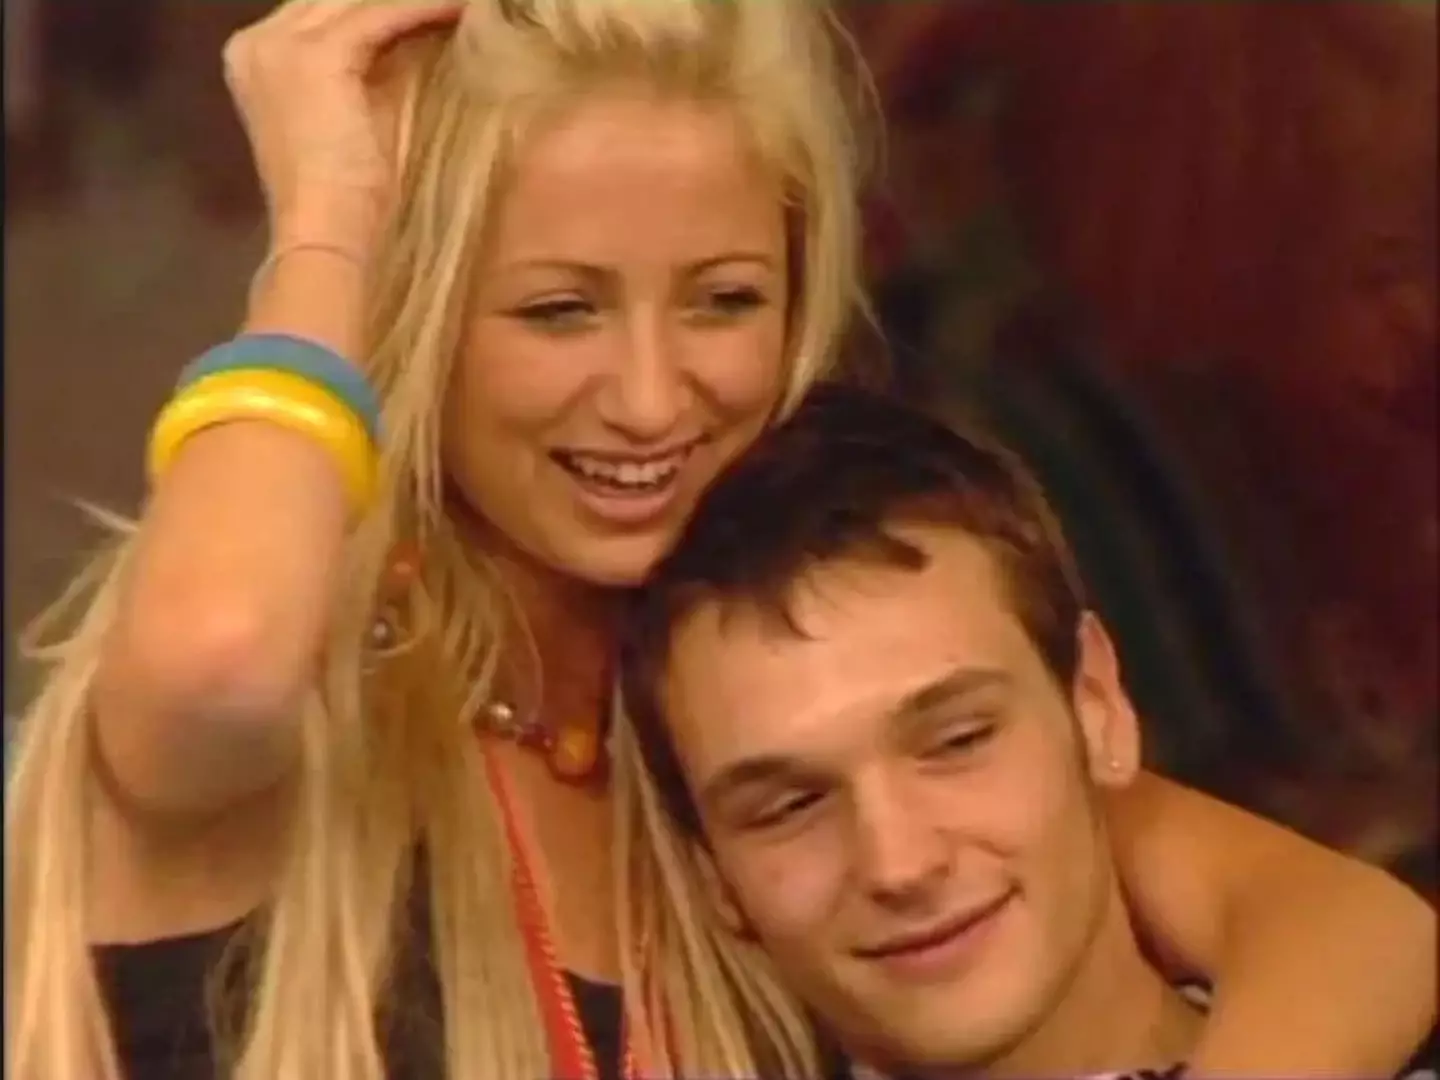 The pair met on Celebrity Big Brother back in 2006.